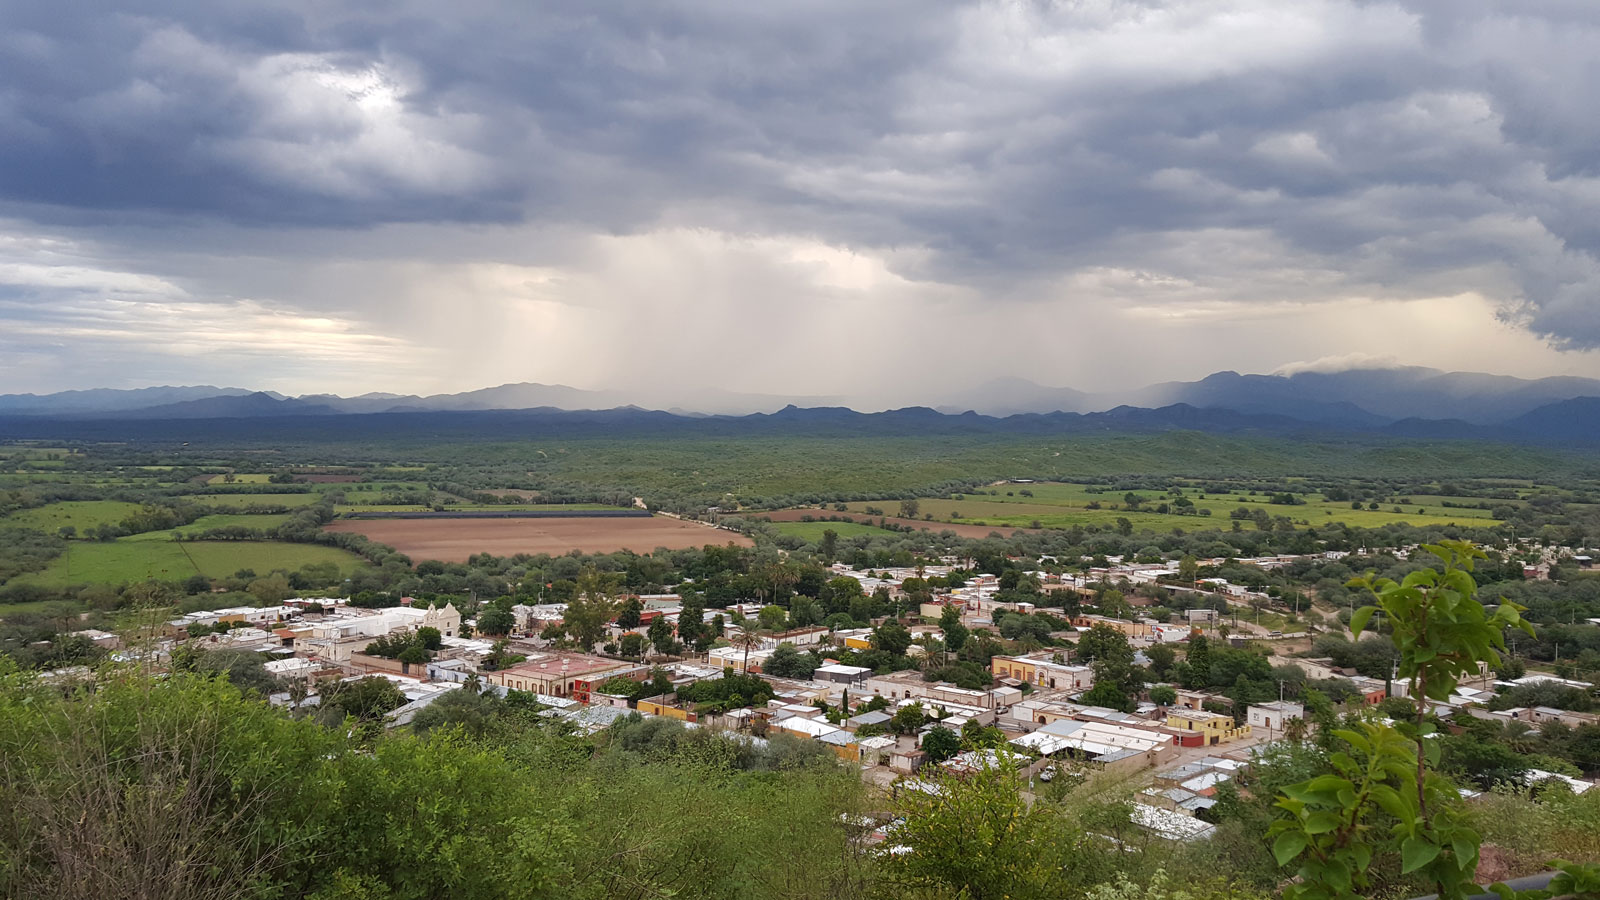 view of the town of Rayon in Mexico